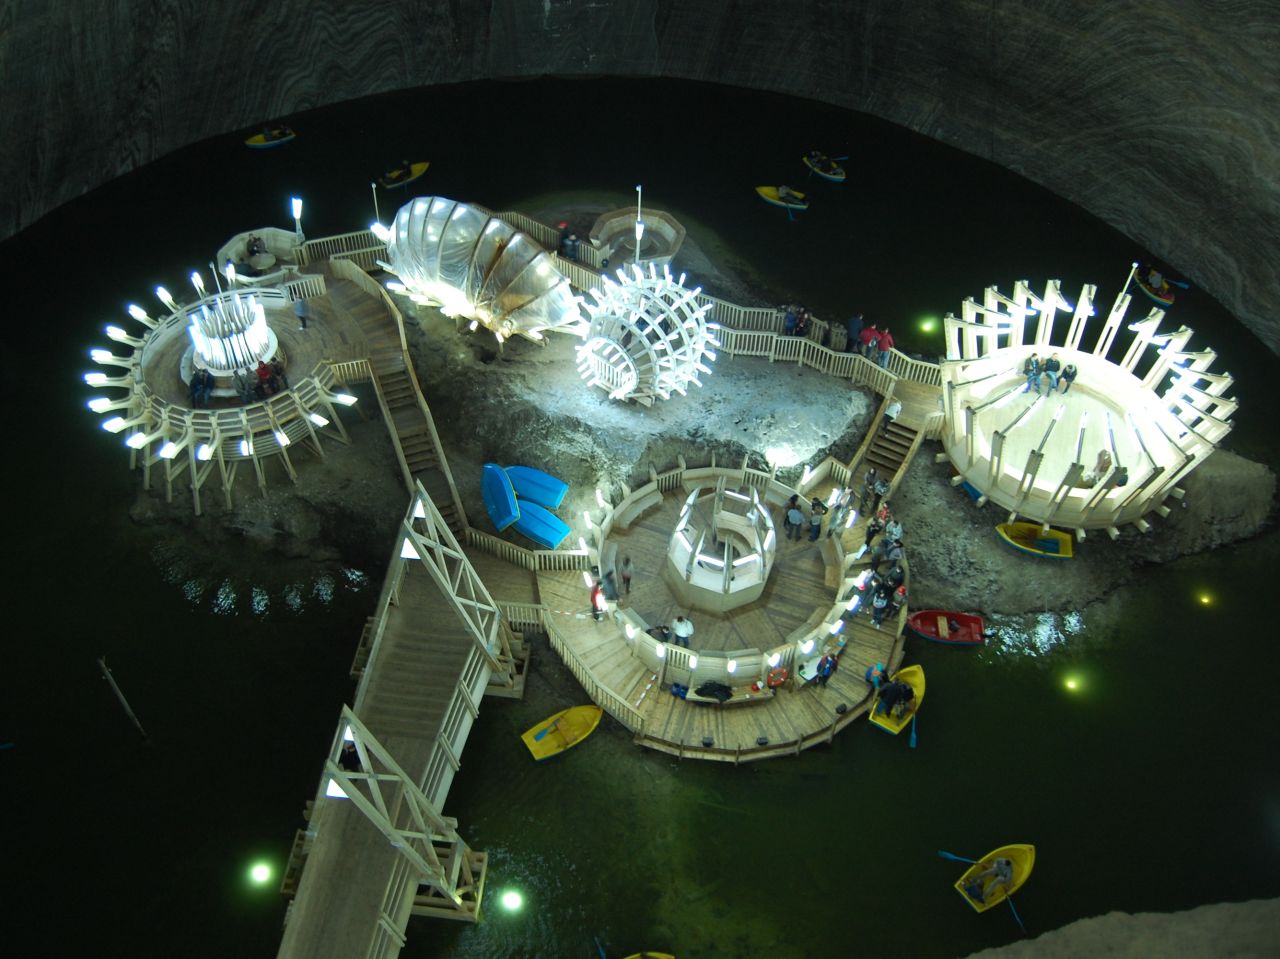 Located in the heart of Transylvania, Salina Turda opened to the public in 1992. Visitors descend 120 meters underground along the same elevator shafts that once hauled salt to reach an underground theme park.